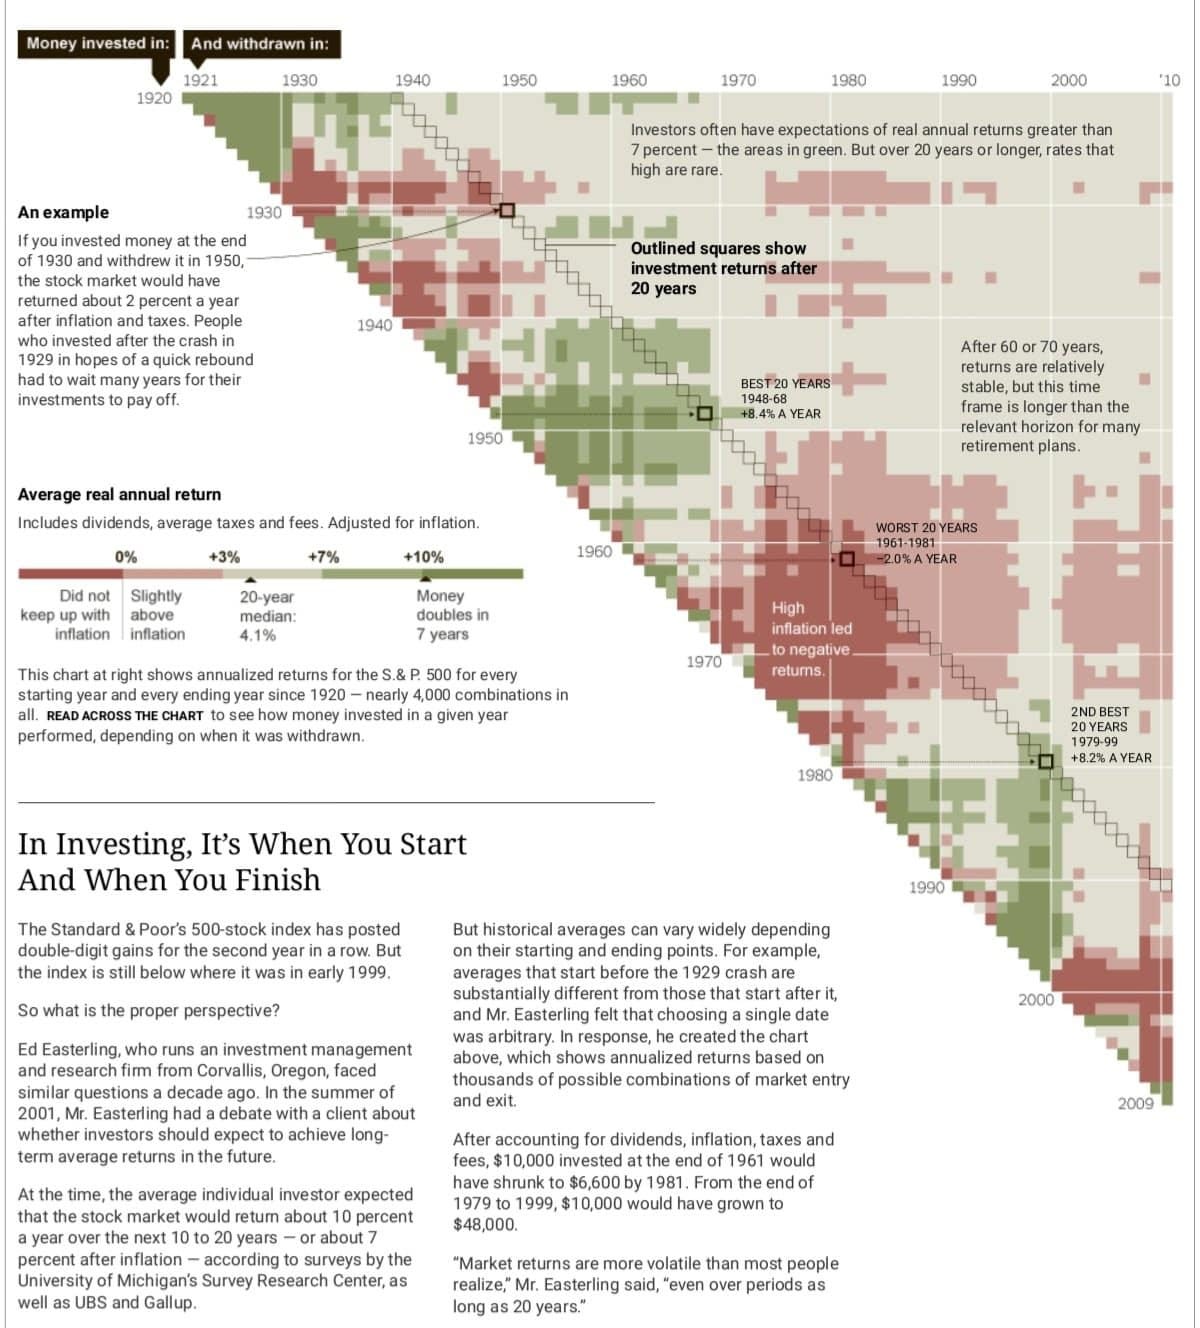 May be an image of text that says 'Money invested And withdrawnin 1920 1940 1970 Anexample 1990 Investors 7percent 1930 end 950,- withdrew expectations areas green. 10 annual returns greater than 0years longer, Outlined squares show 1940 guick their years BEST20 dividends, stable, Adjusted inflation. +10% retirement many 1960 years performed, depending every how nvested withdrawn. 1970 returns. In Investing, It's When When You Finish Start 1980 2NDBEST 1979.00 Poor's O-stock posted early 1990 depending management summer 2000 market entry retum dividends. inflation, invested expected 0percent $48,000. Survey Research Gallup. long Easterling years." even periods'